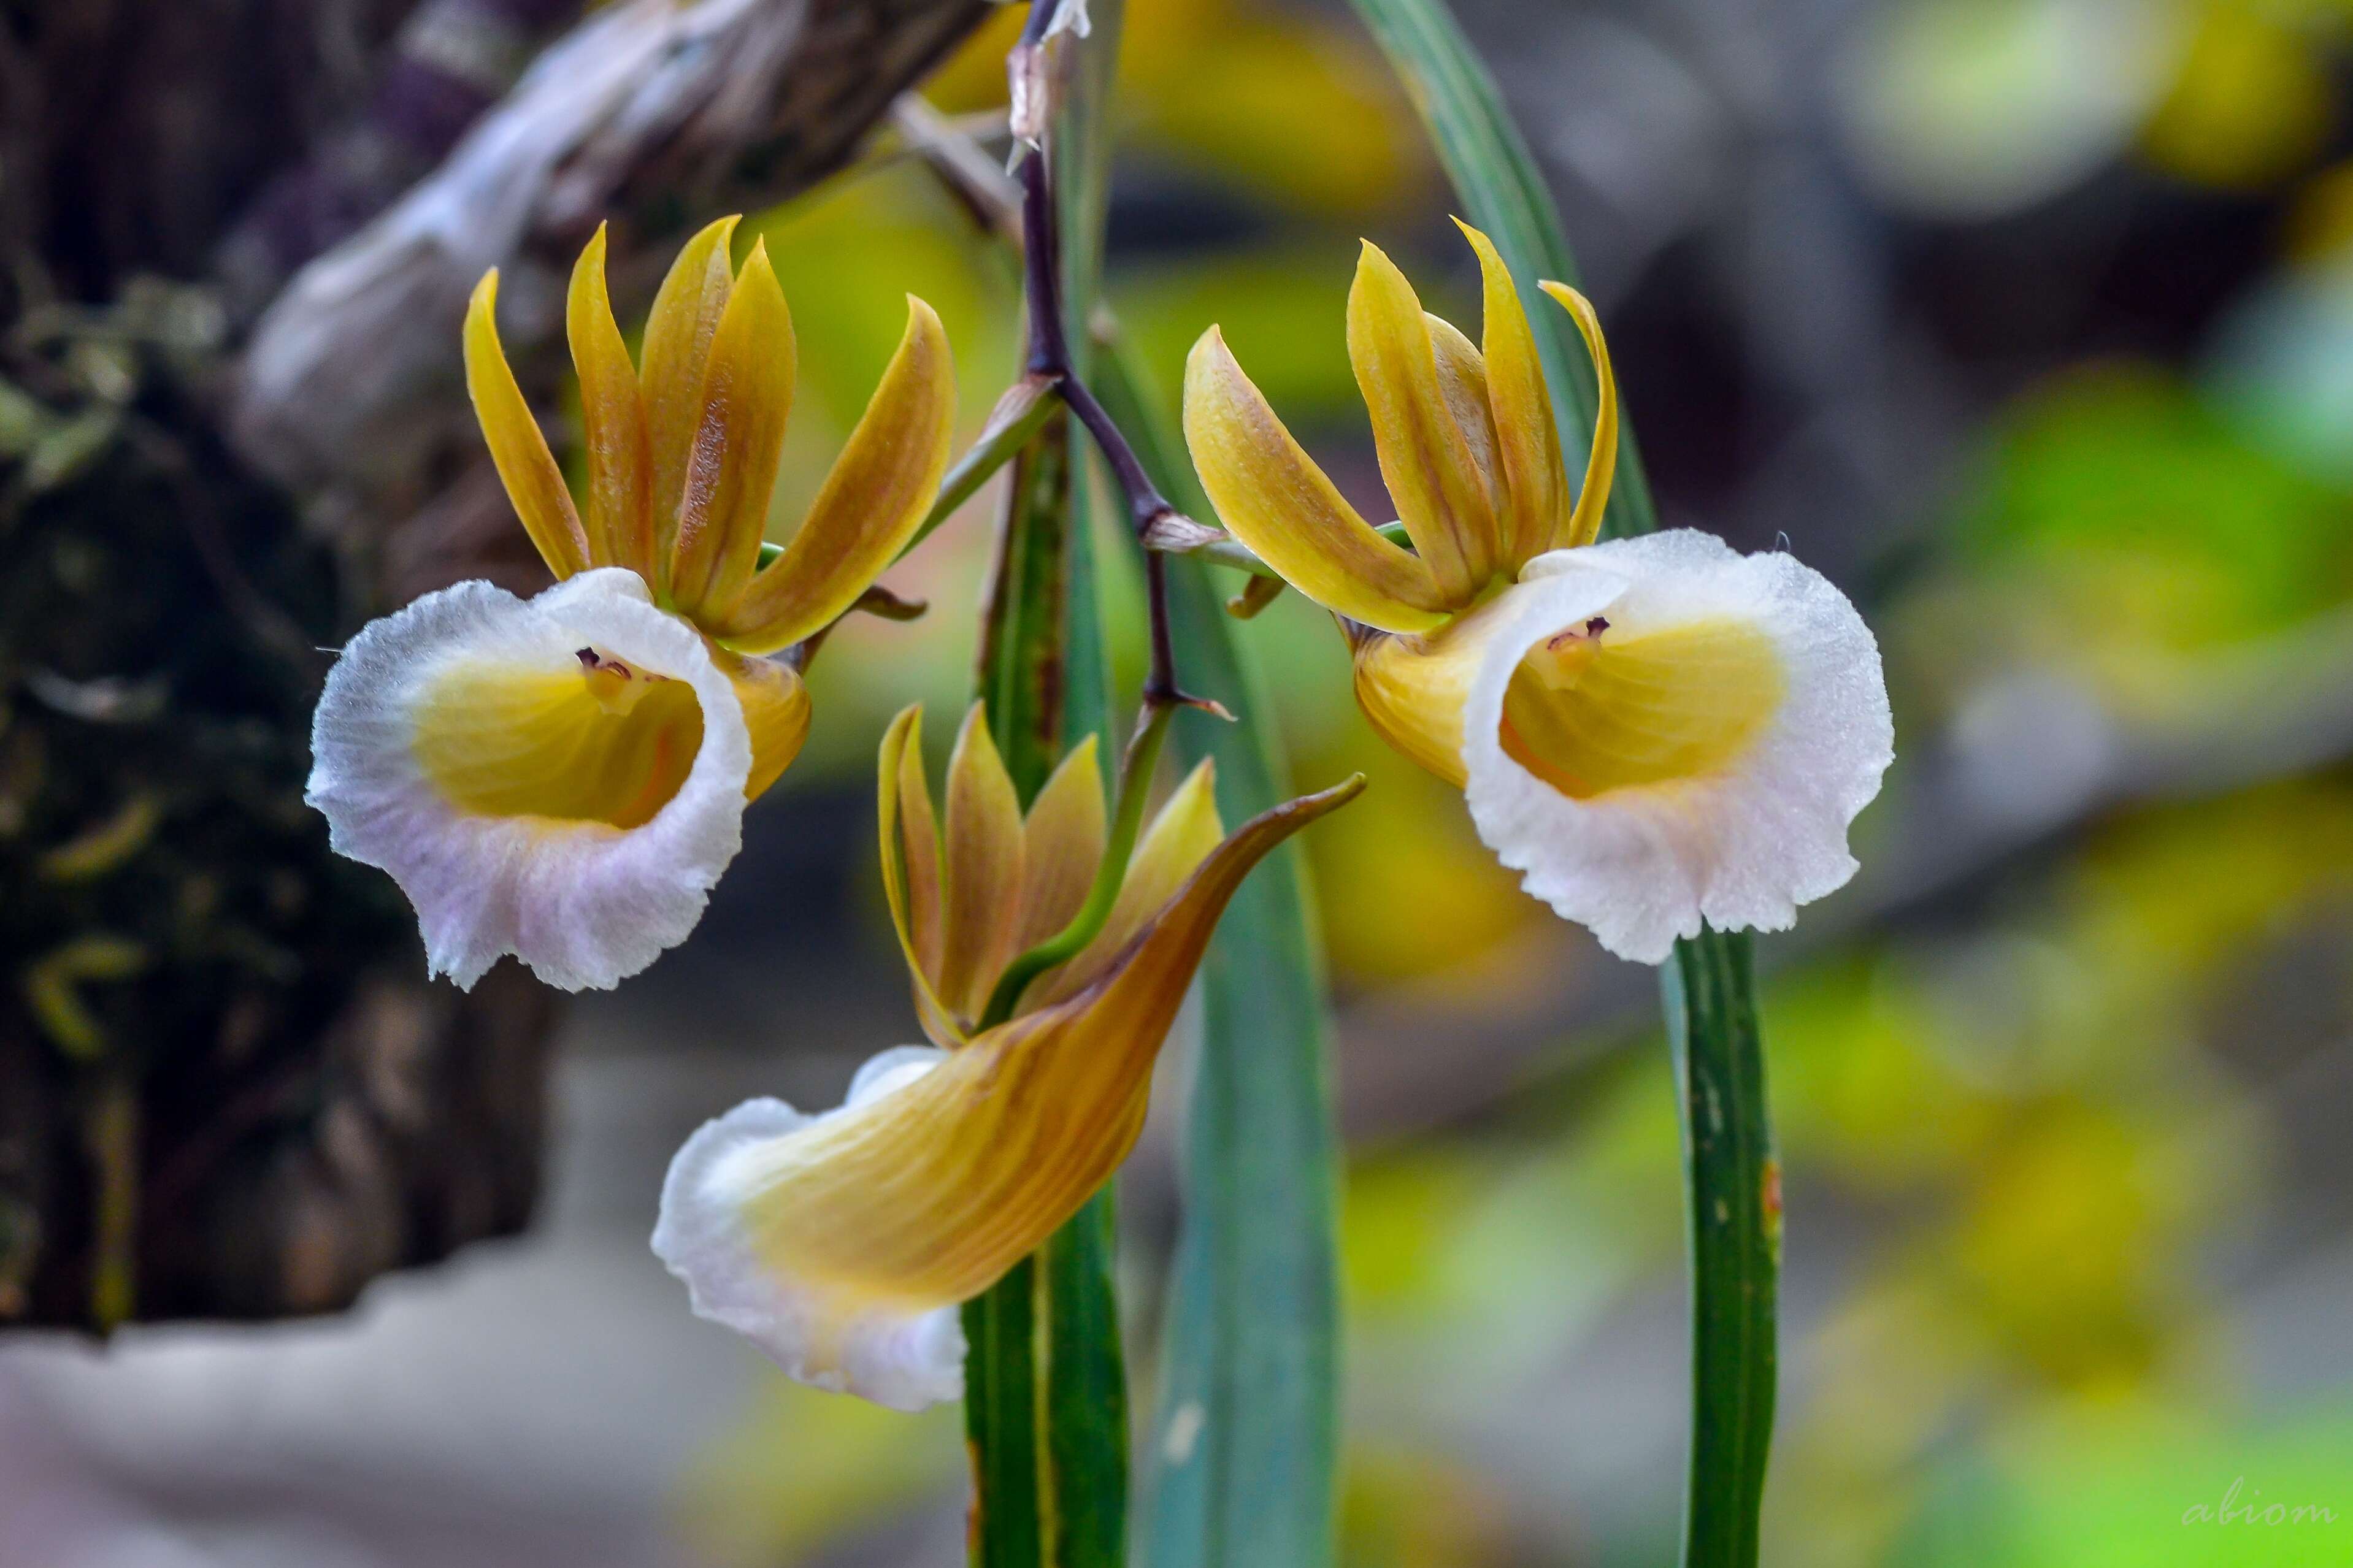 Image of Hooded orchids